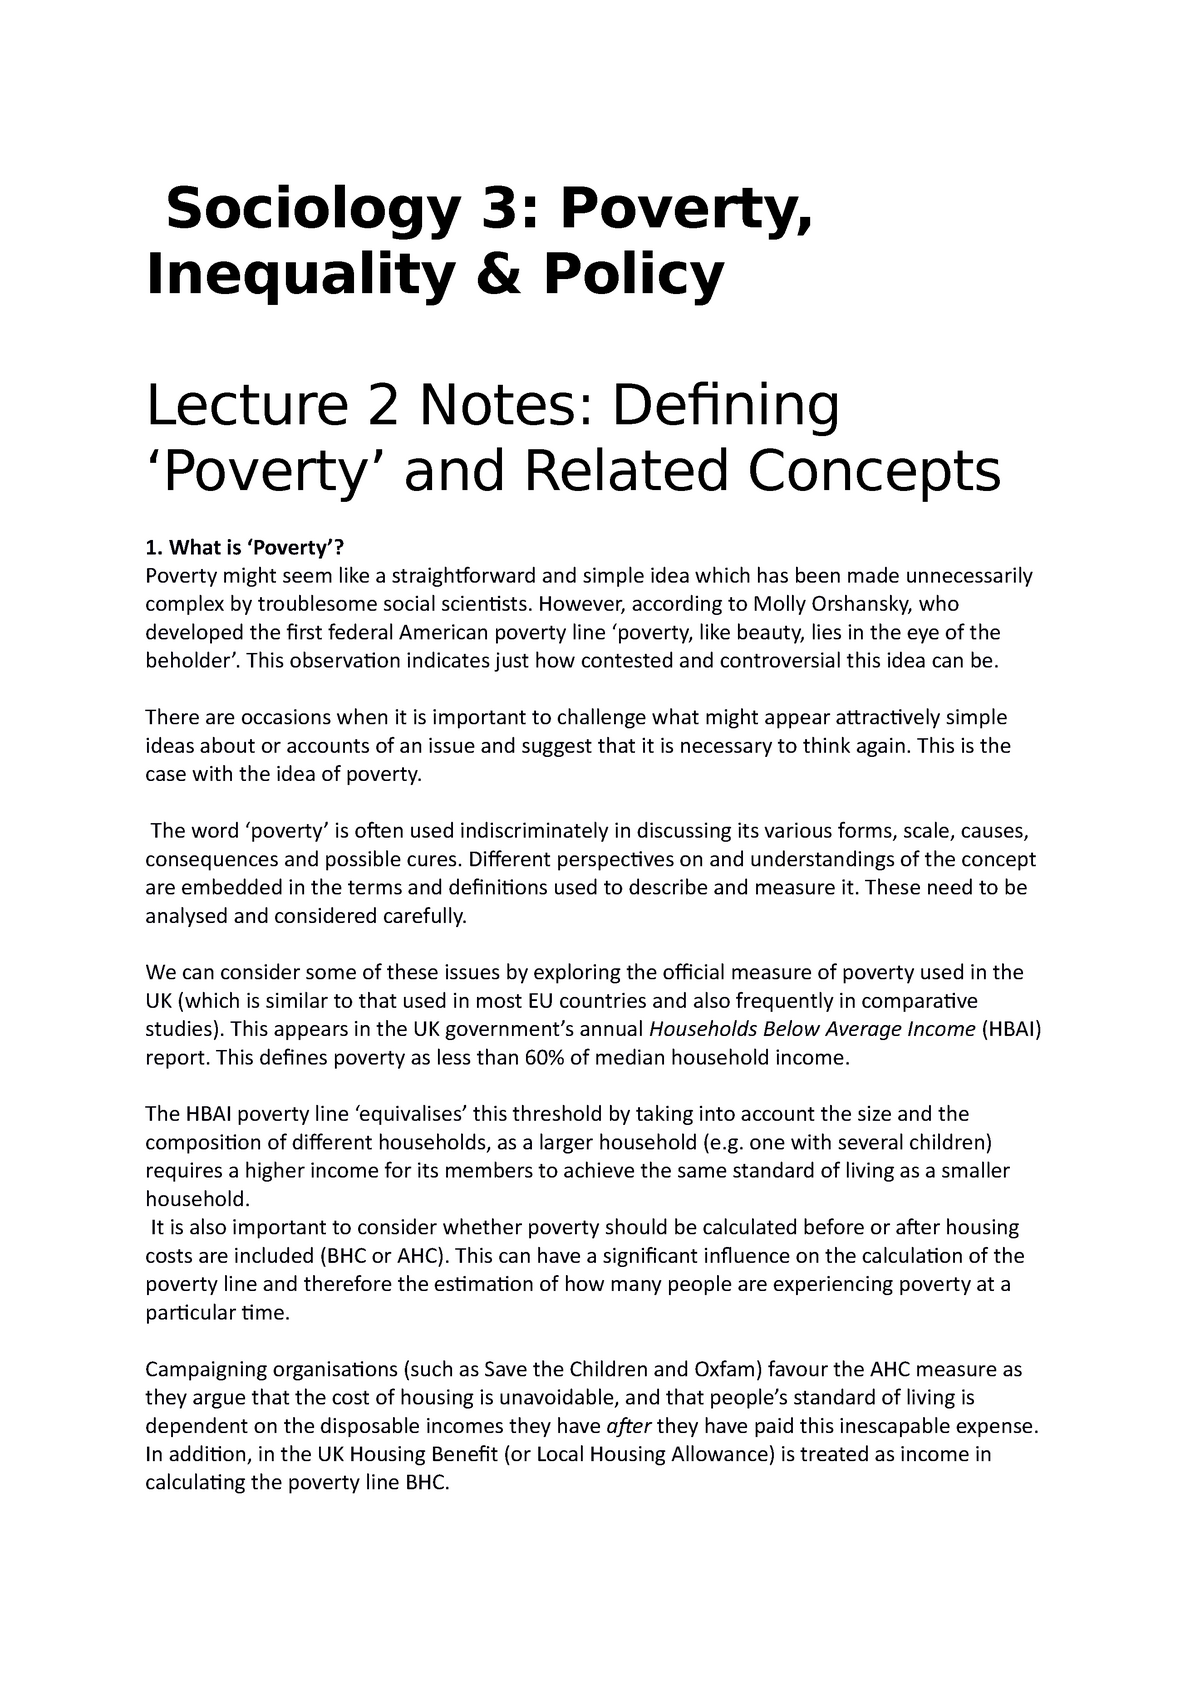 poverty definition essay